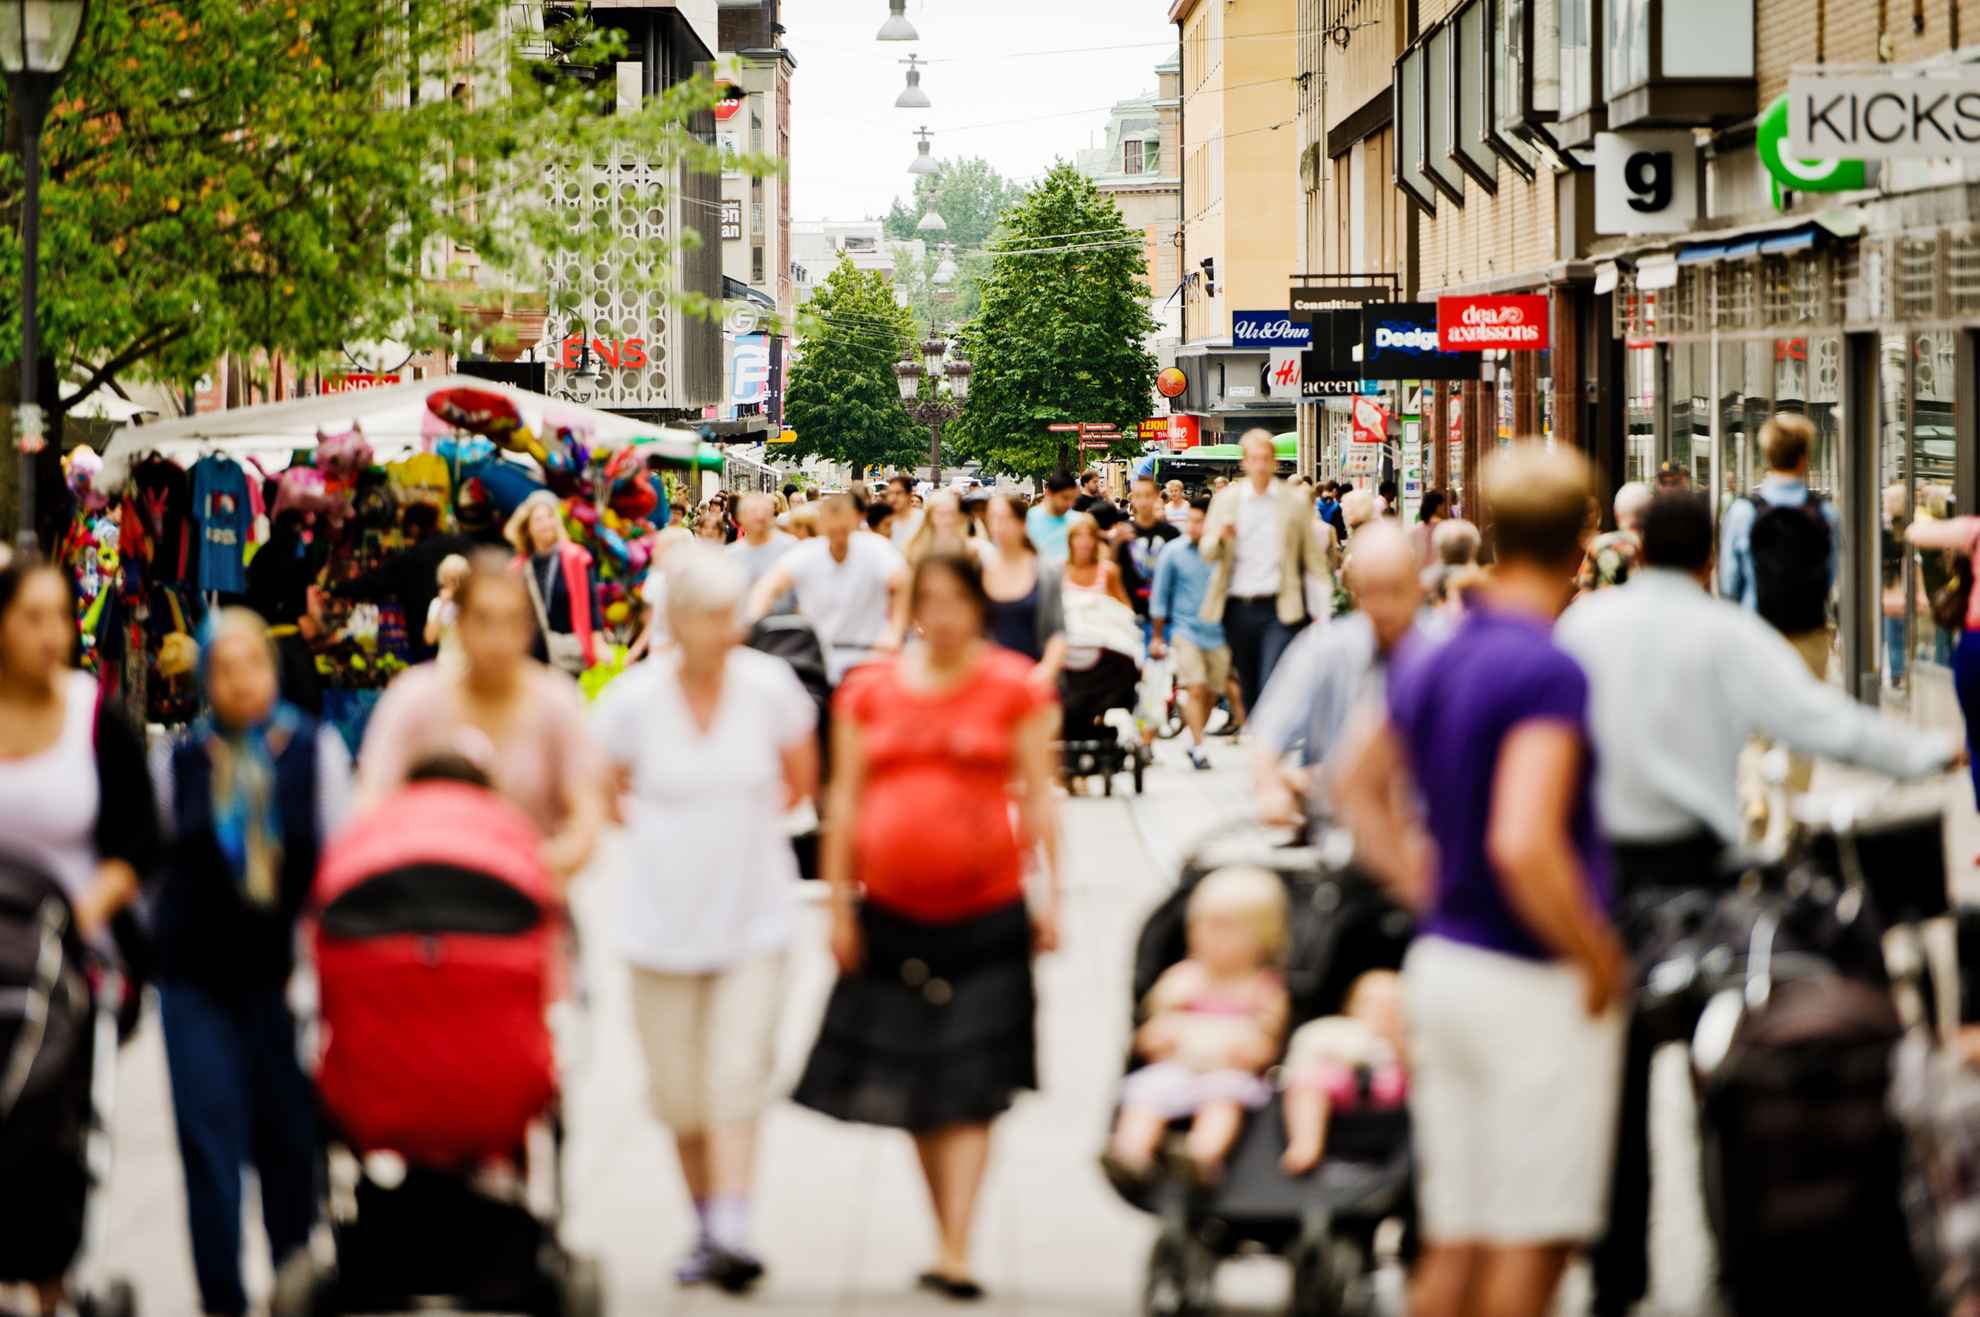 Shopping in Uppsala on a busy street during summer